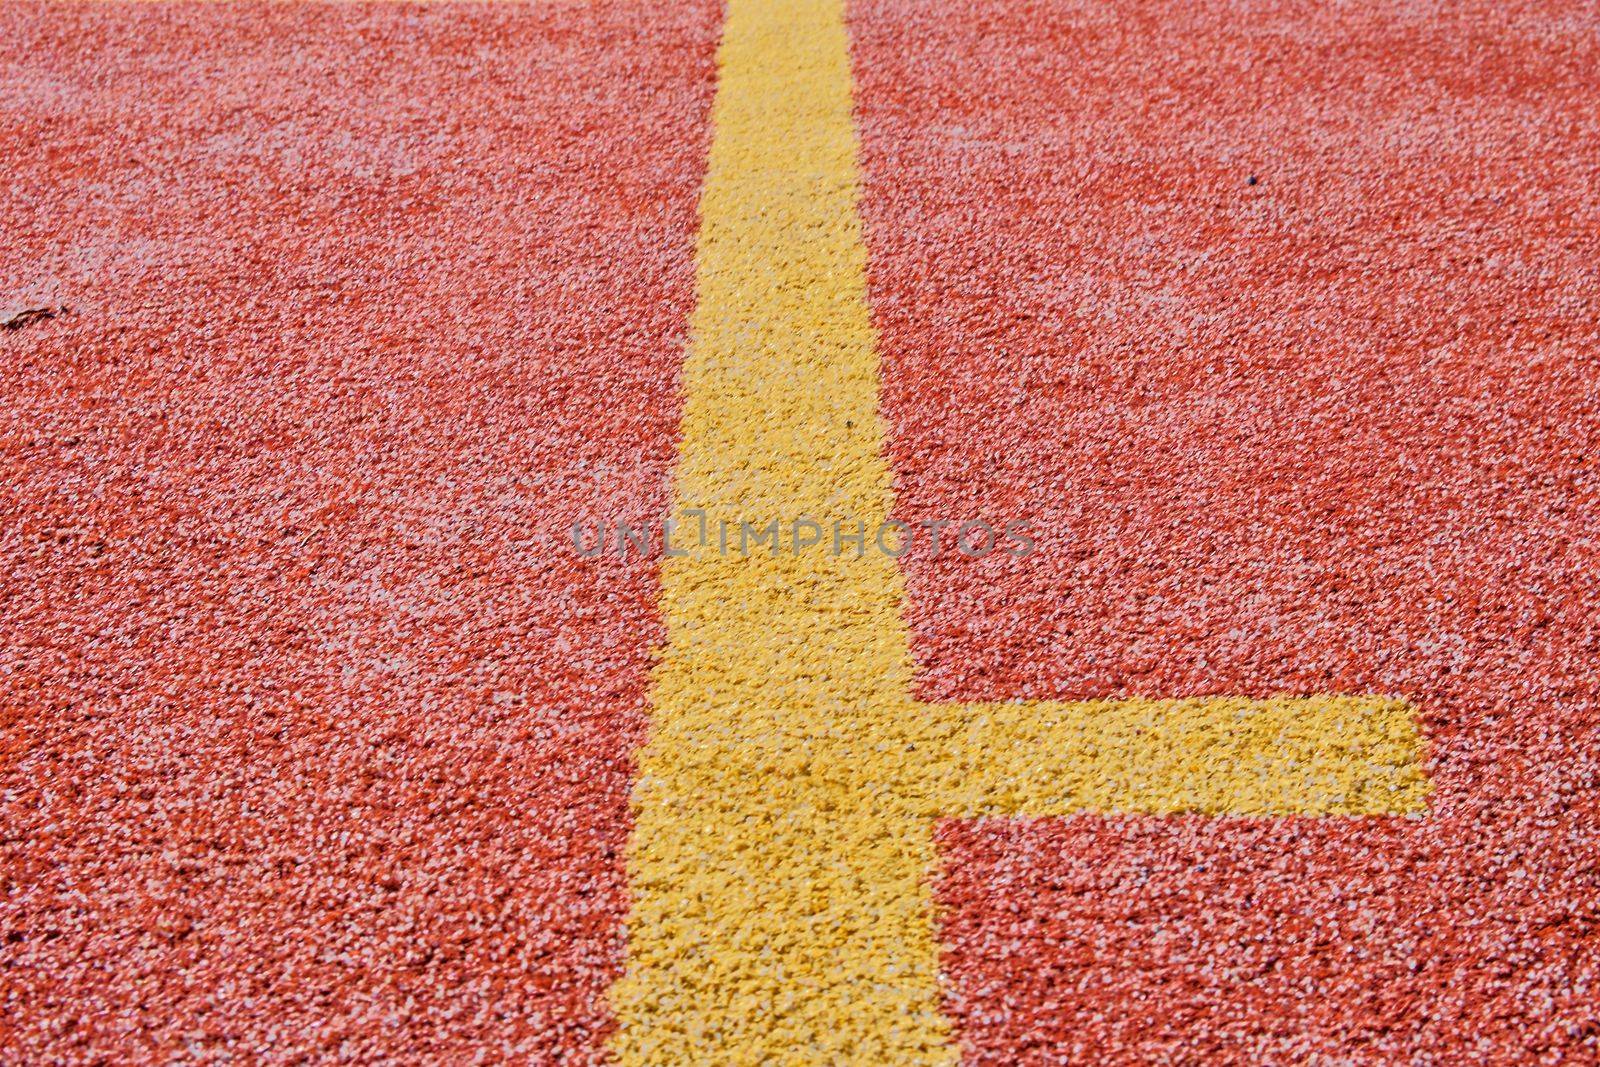 Yellow line on red playing field. Copy space. Sport texture and background by roman_nerud